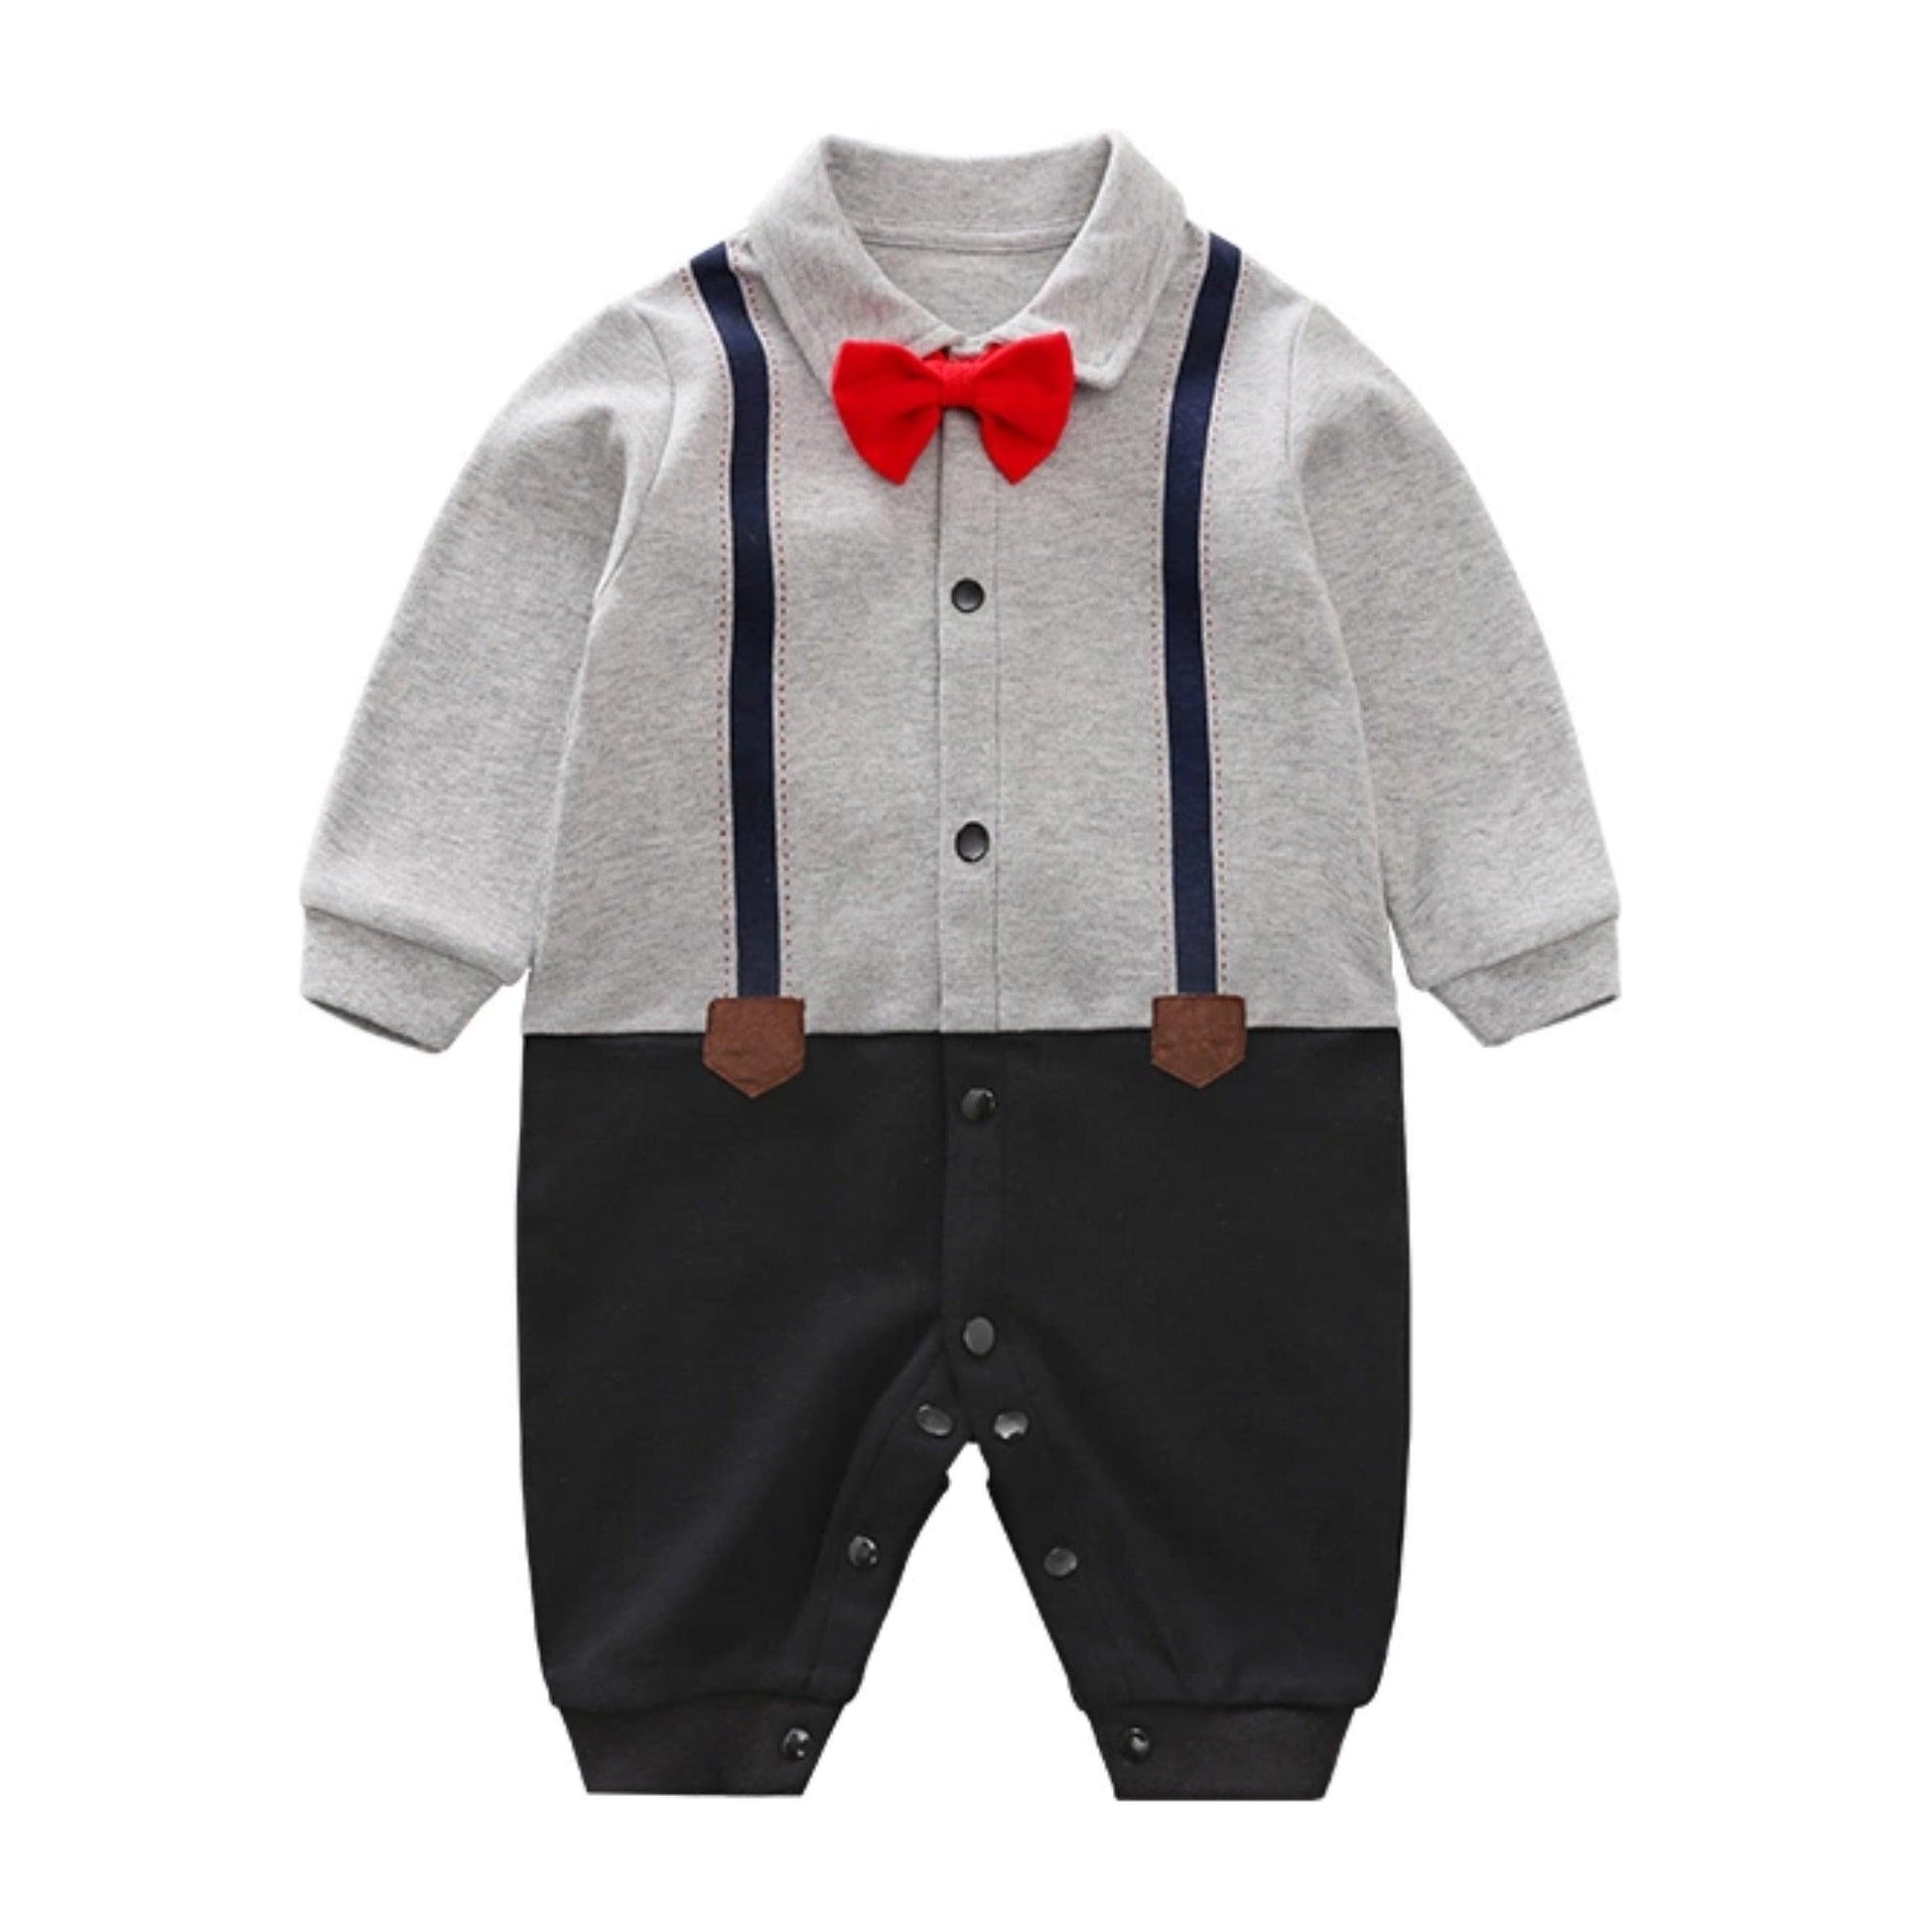 Formal suit baby bow tie romper - Try Modest Limited 